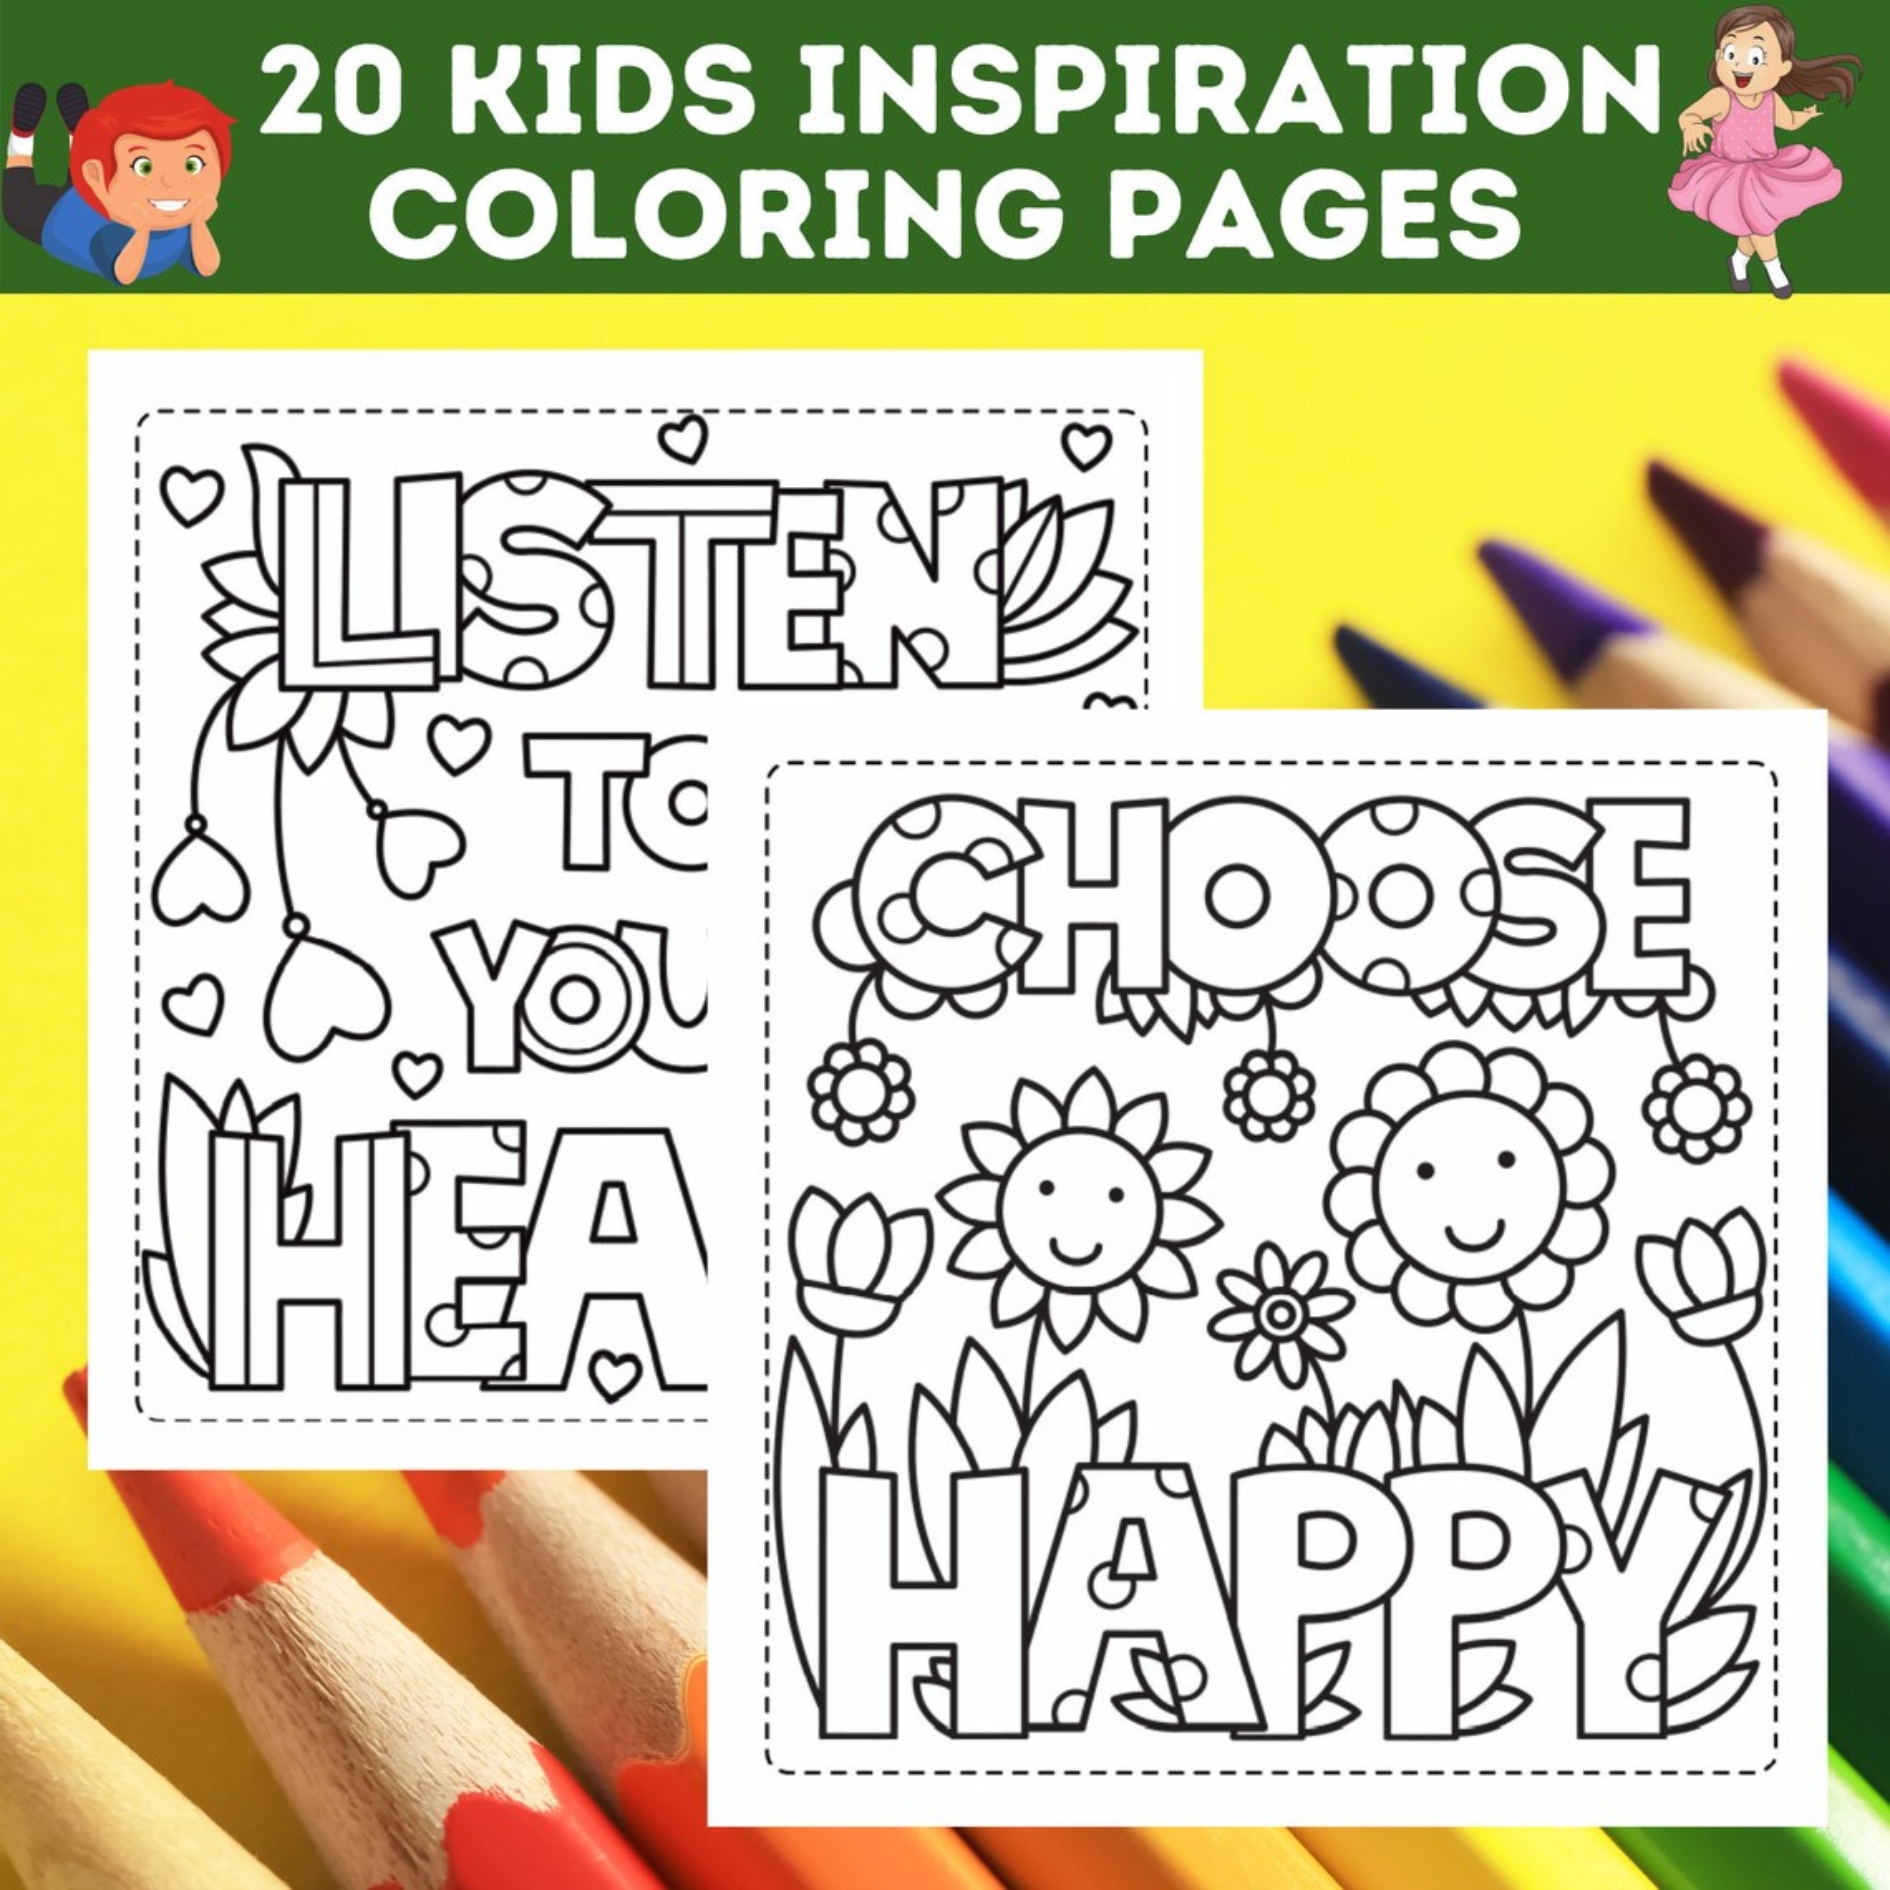 Kids inspiration coloring pages kids motivation inspiration printable inspirational quotes for made by teachers